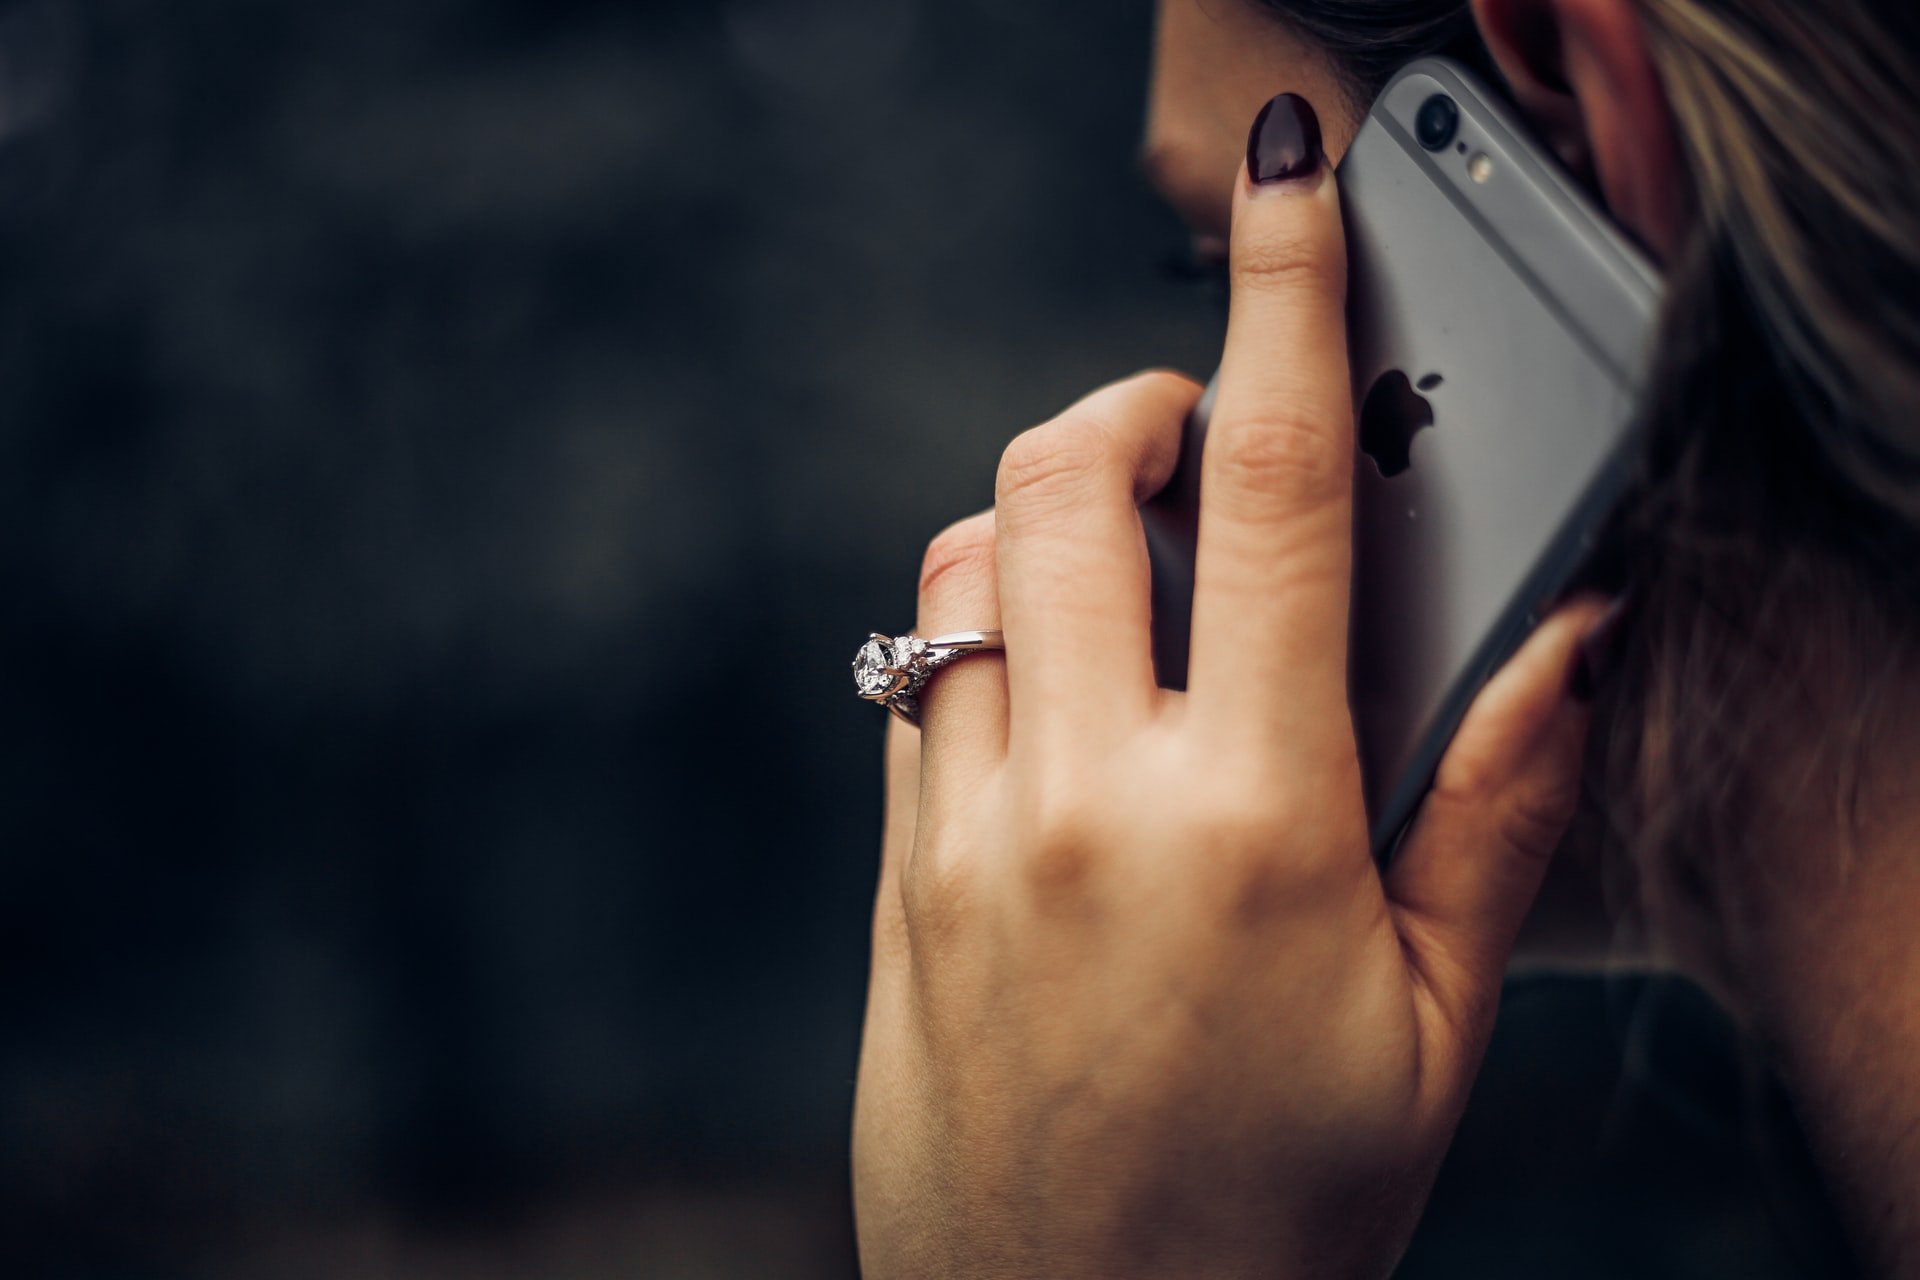 The girl got a call informing her that her mother wasn't well | Source: Unsplash